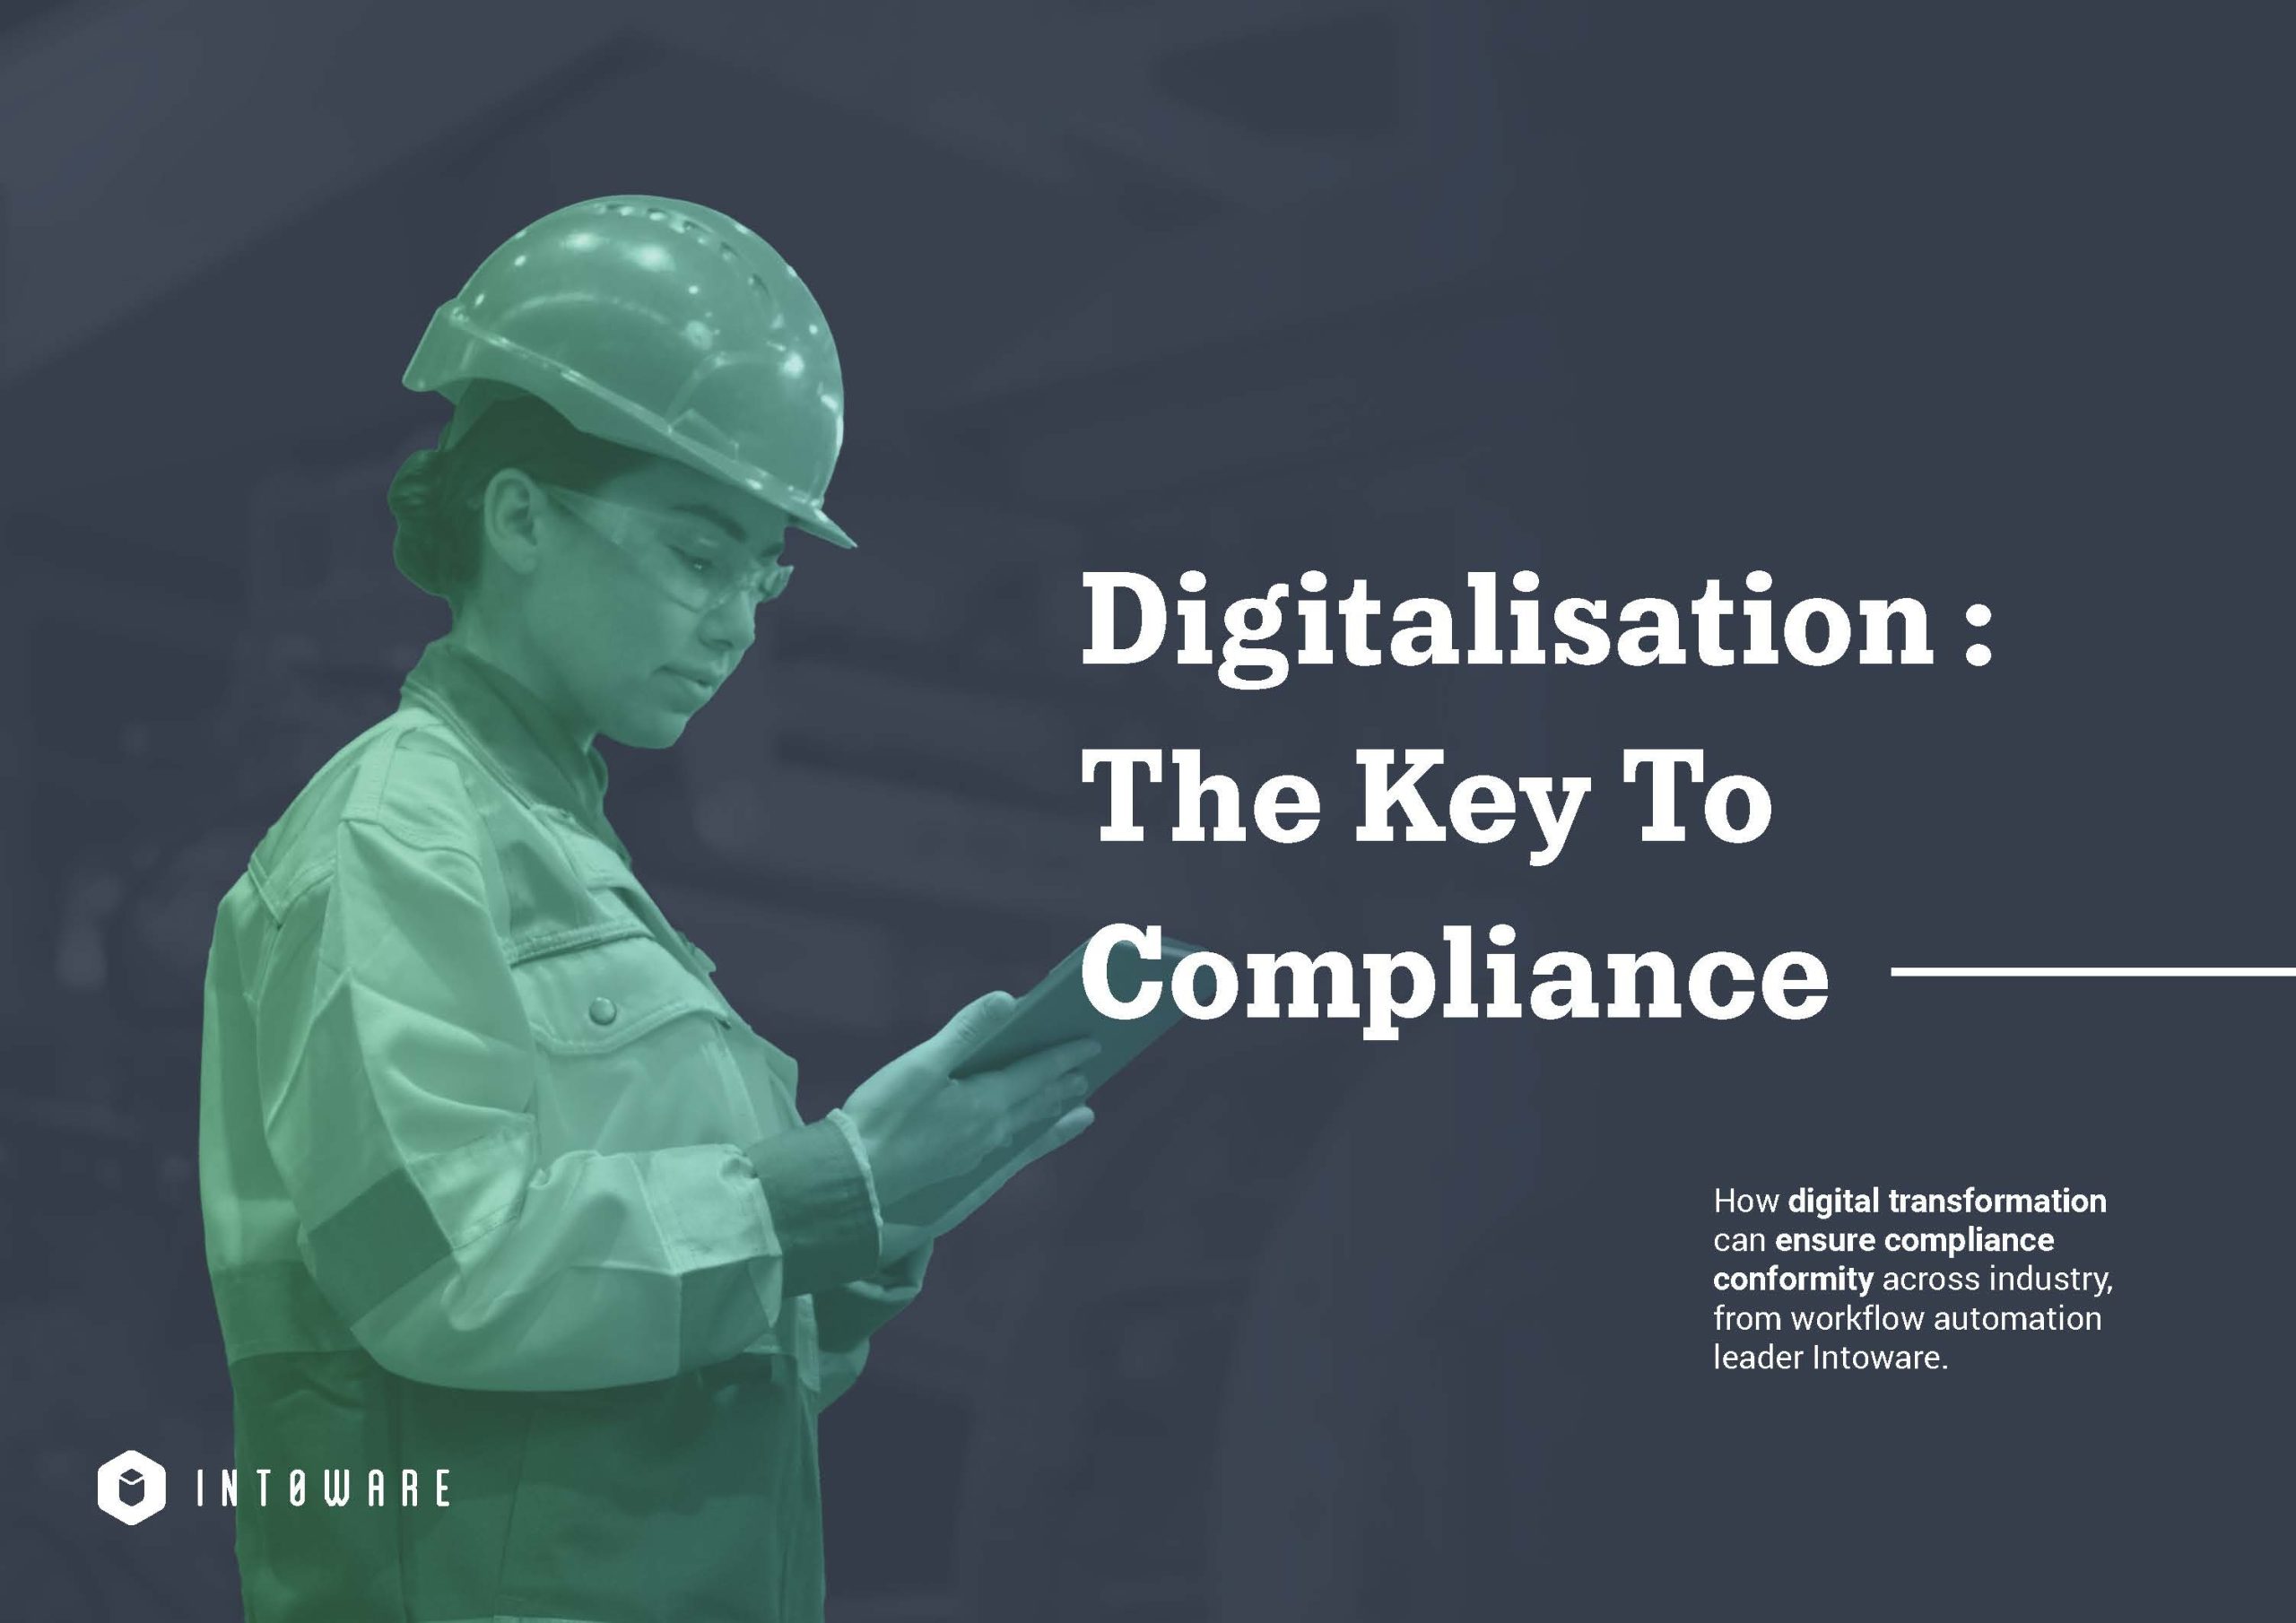 Digital transformation holds the key to industry compliance